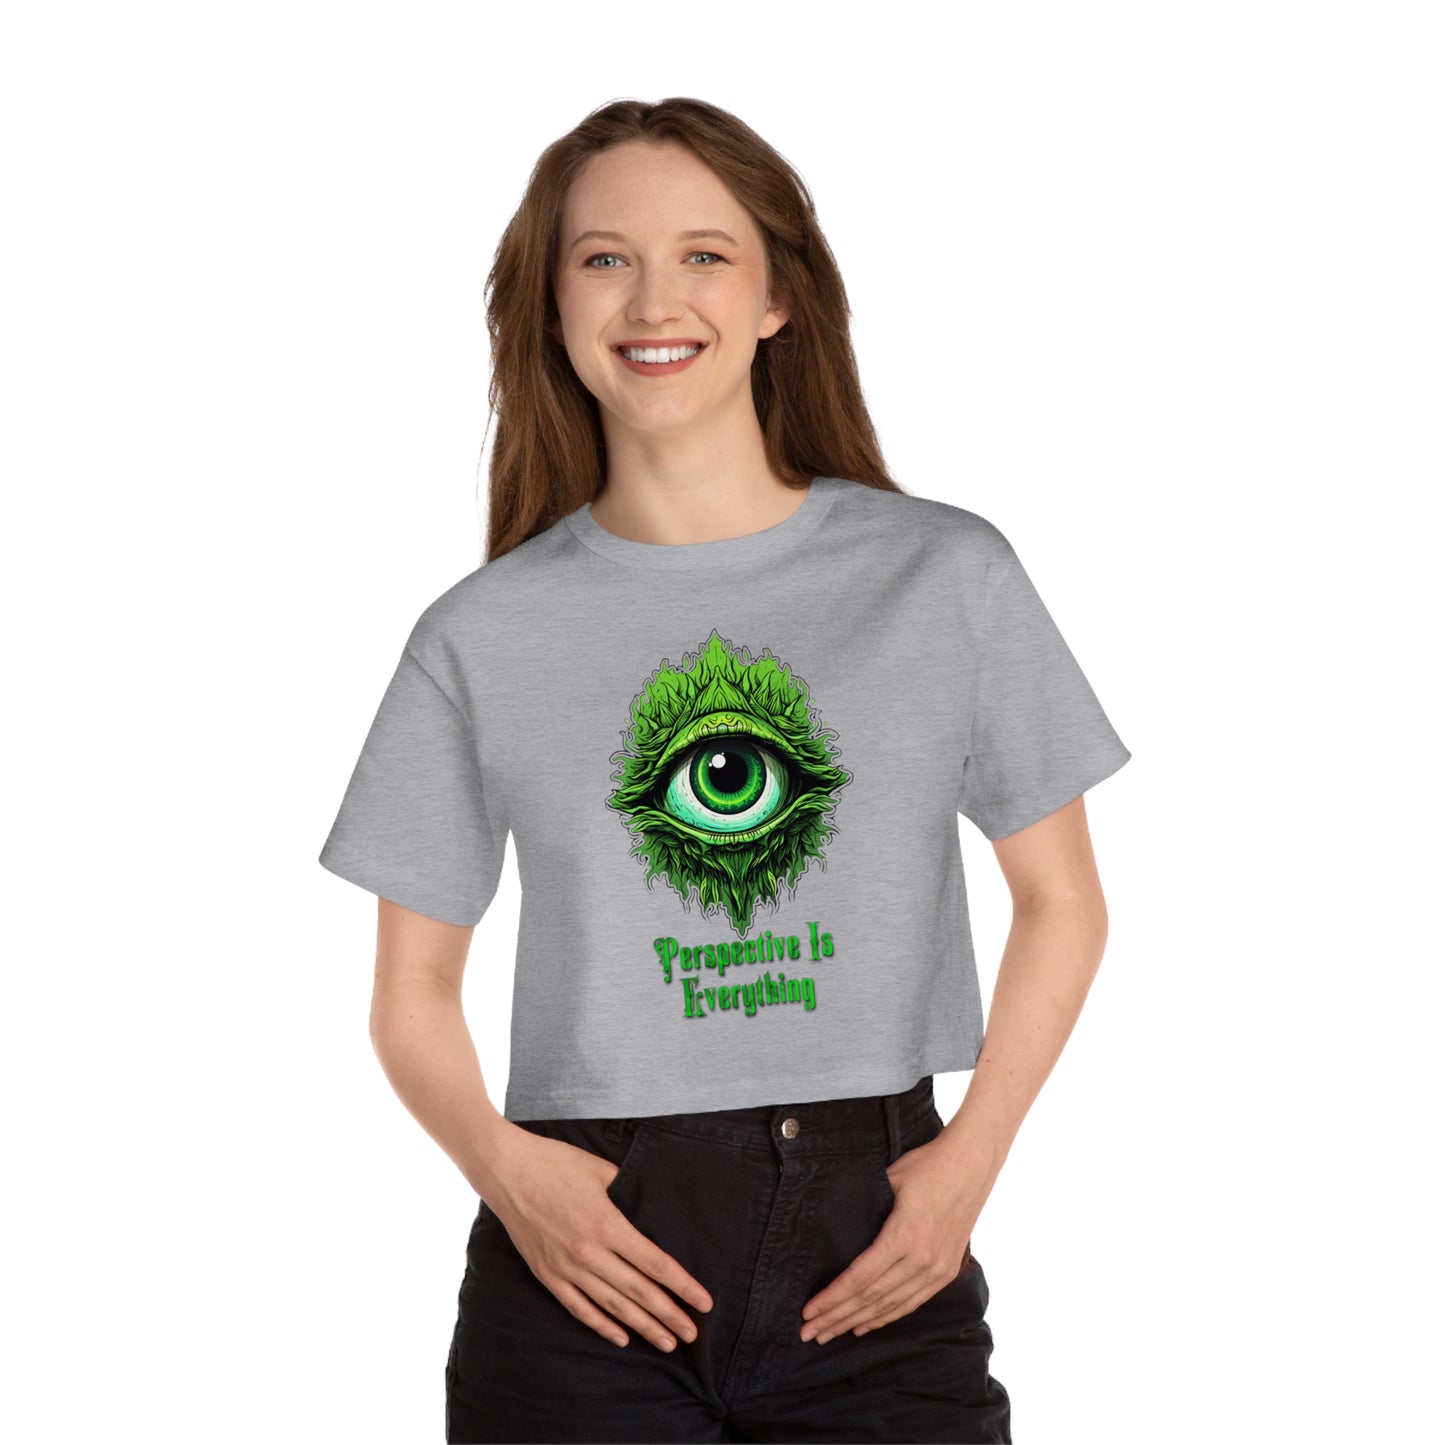 Perspective is Everything: Green | Champion Women's Heritage Cropped T-Shirt